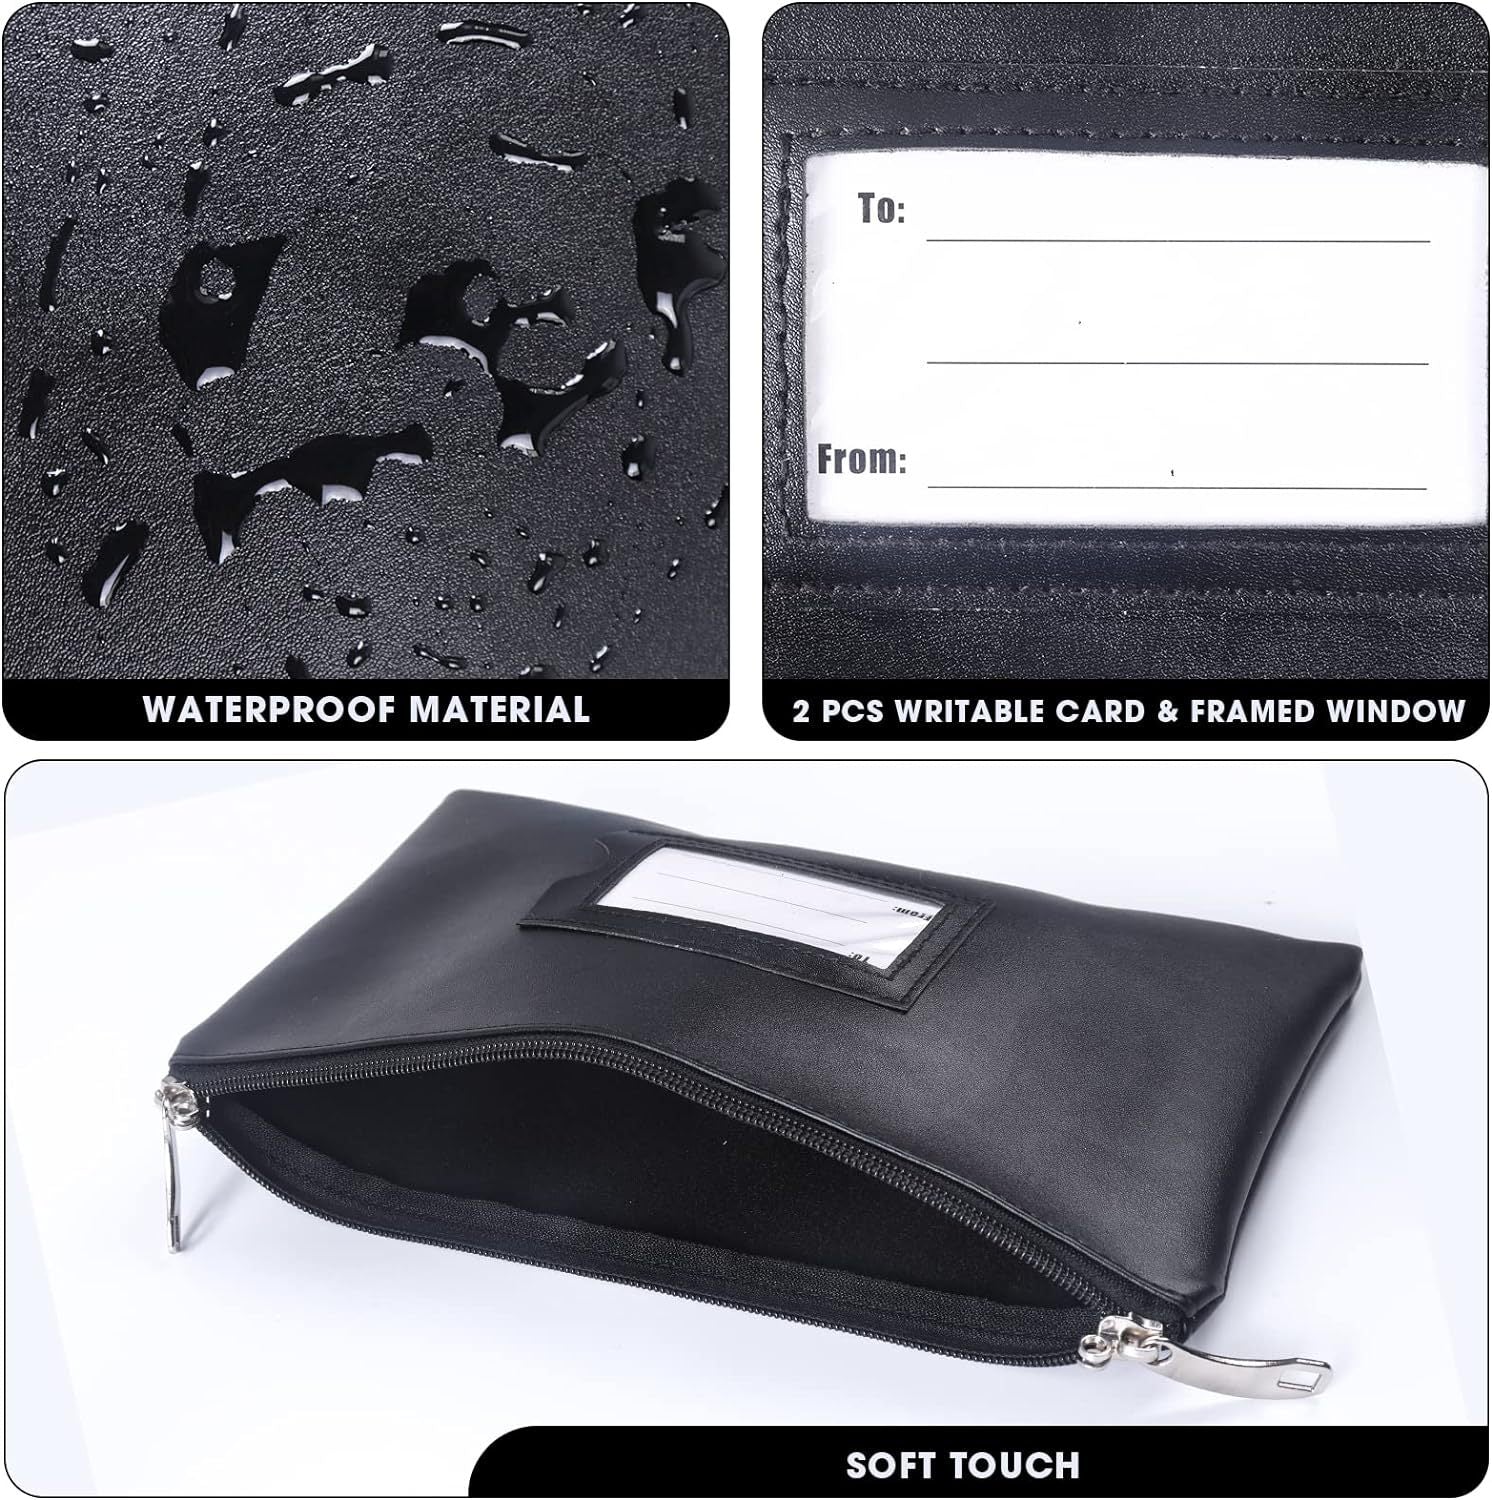 Leather Money Bag with Zipper For Depositing Cash and Bank Deposits